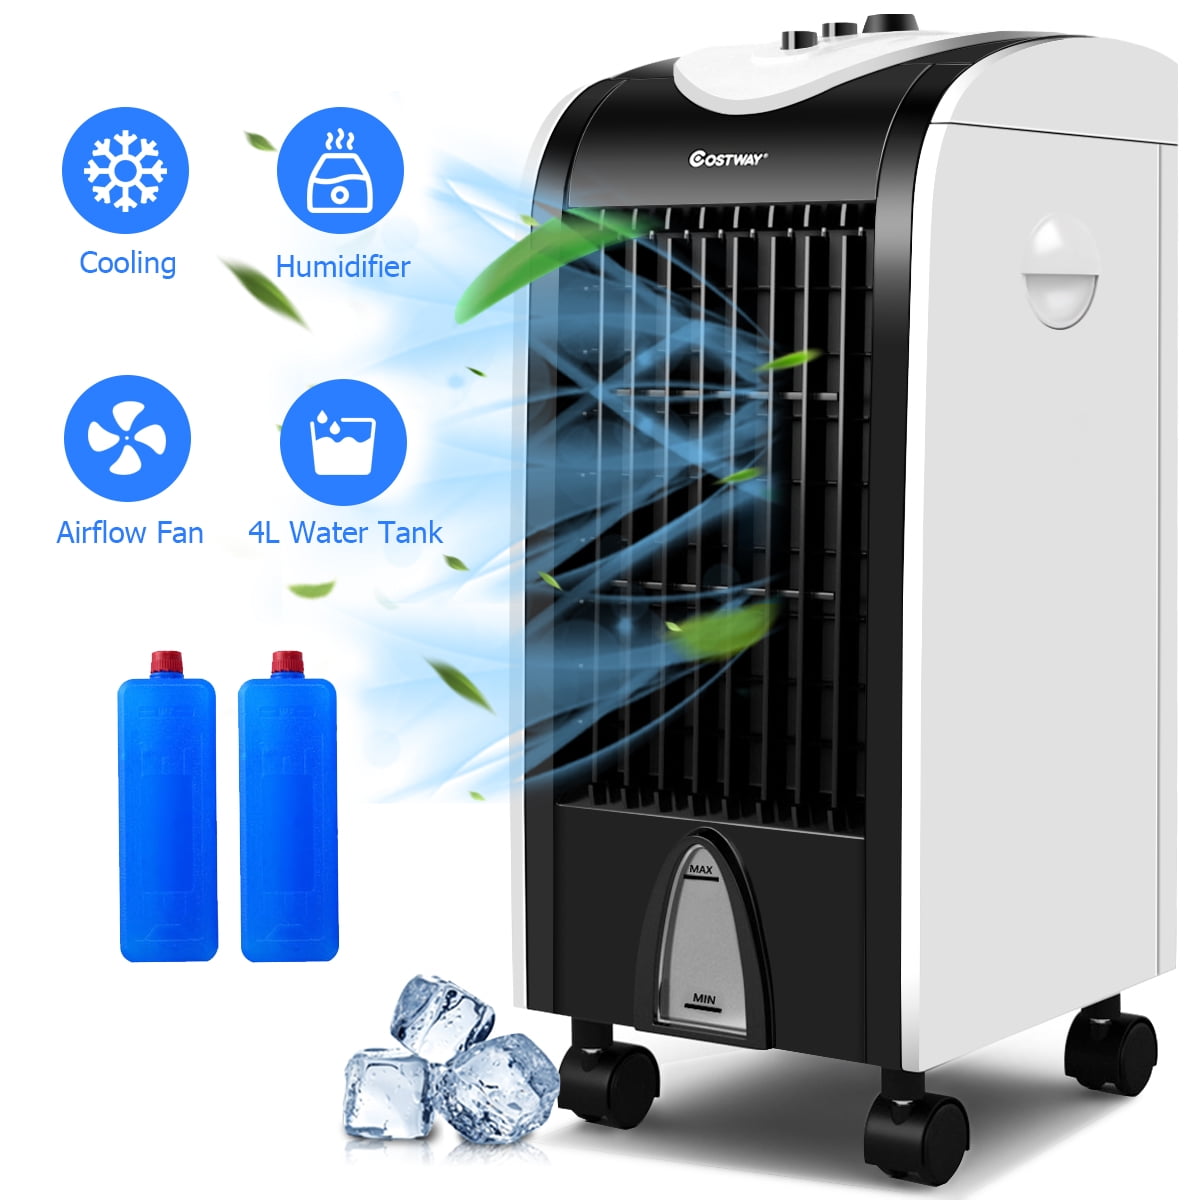 Portable Air Cooler with Fan & Humidifier Bladeless Quiet Electric Fan w/Remote Control for Indoor Home Office Dorms COSTWAY Evaporative Cooler 28-Inch